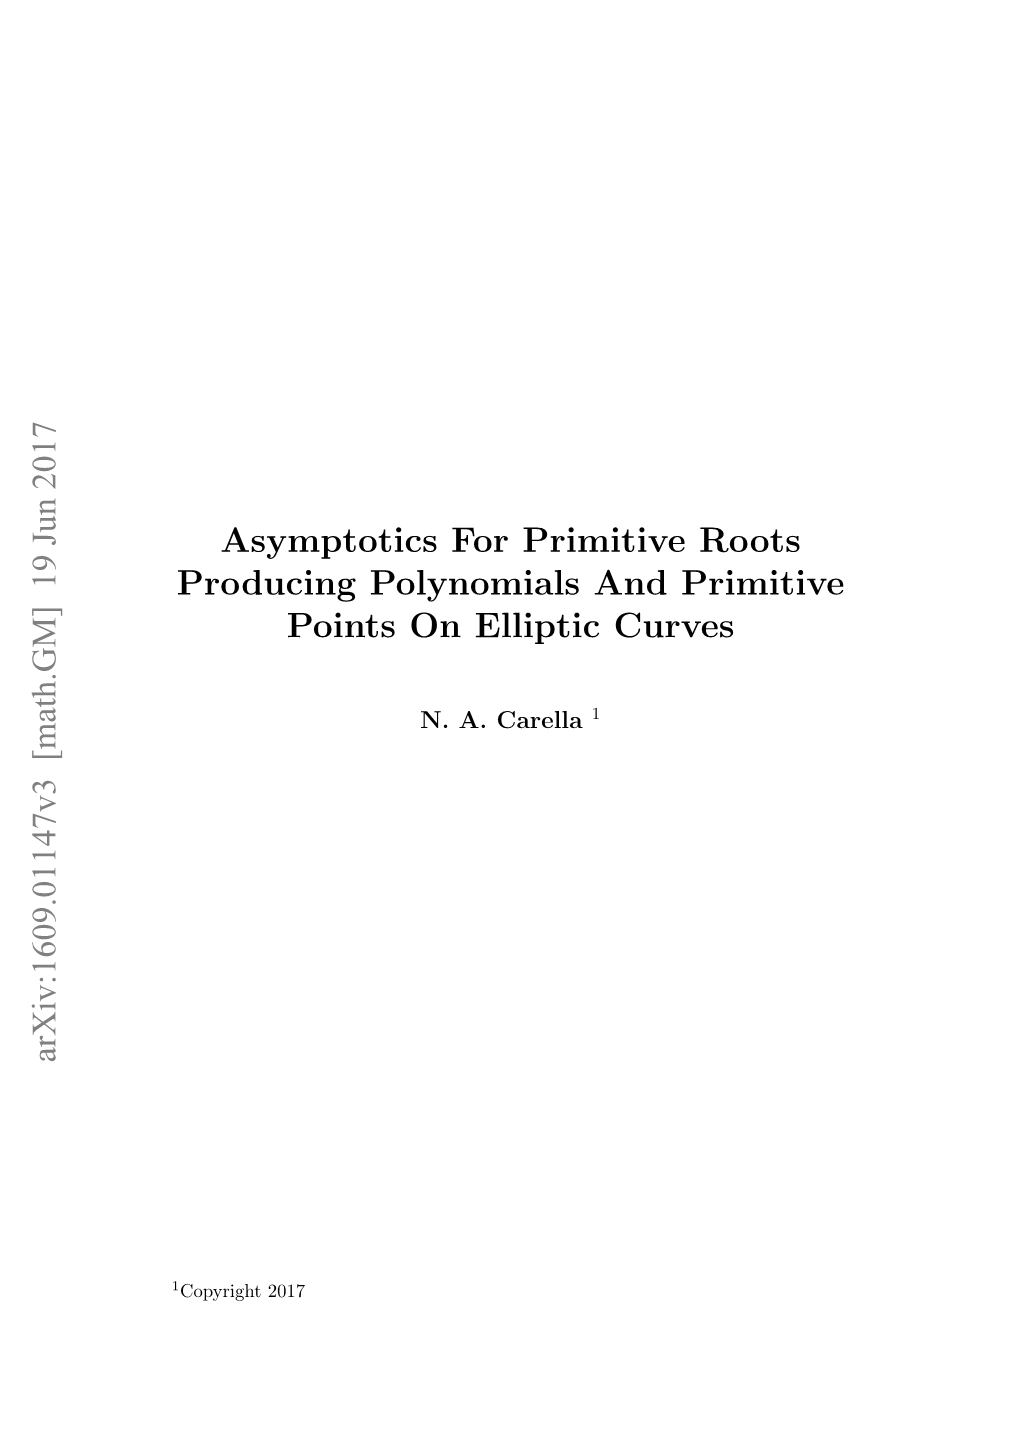 Asymptotics for Primitive Roots Producing Polynomials and Primitive Points on Elliptic Curves